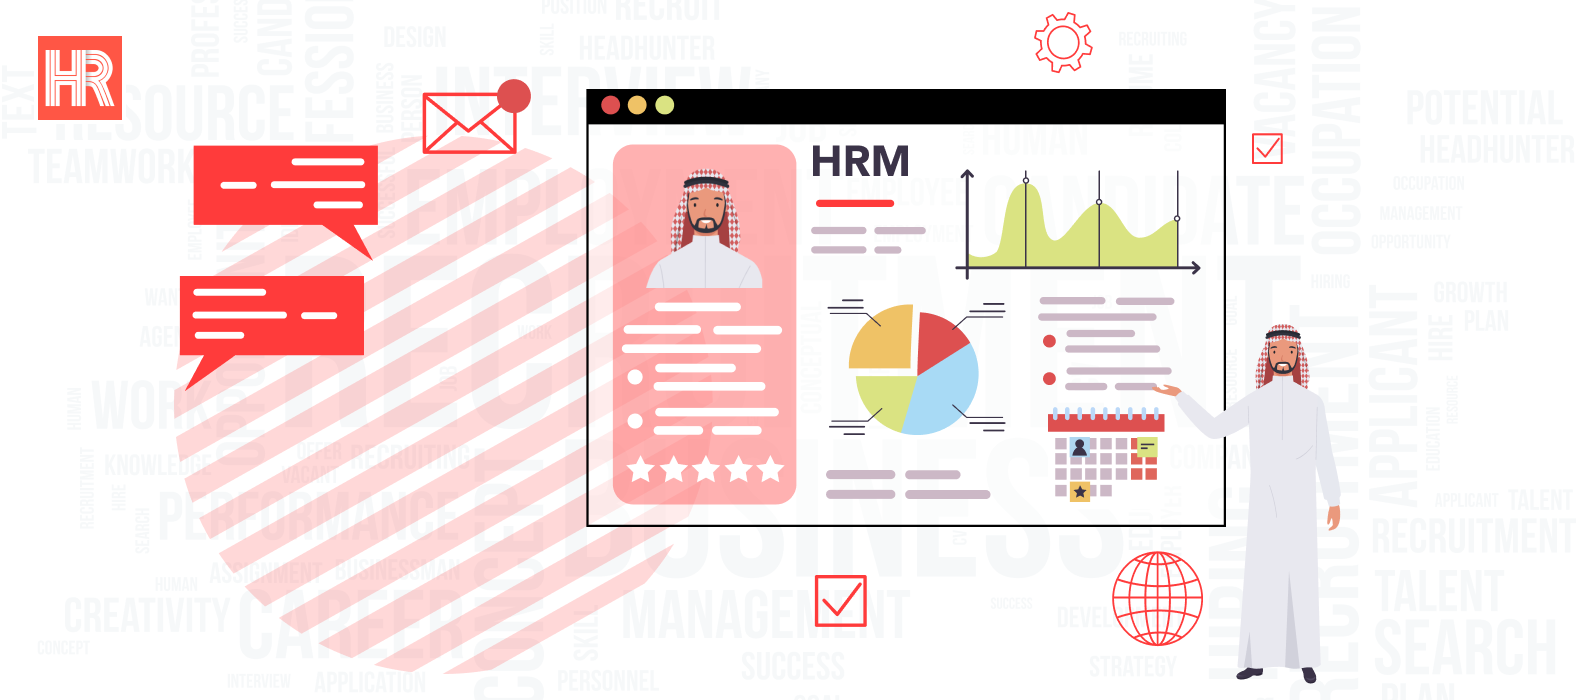 5 Key Considerations Why Human Resource Management Software